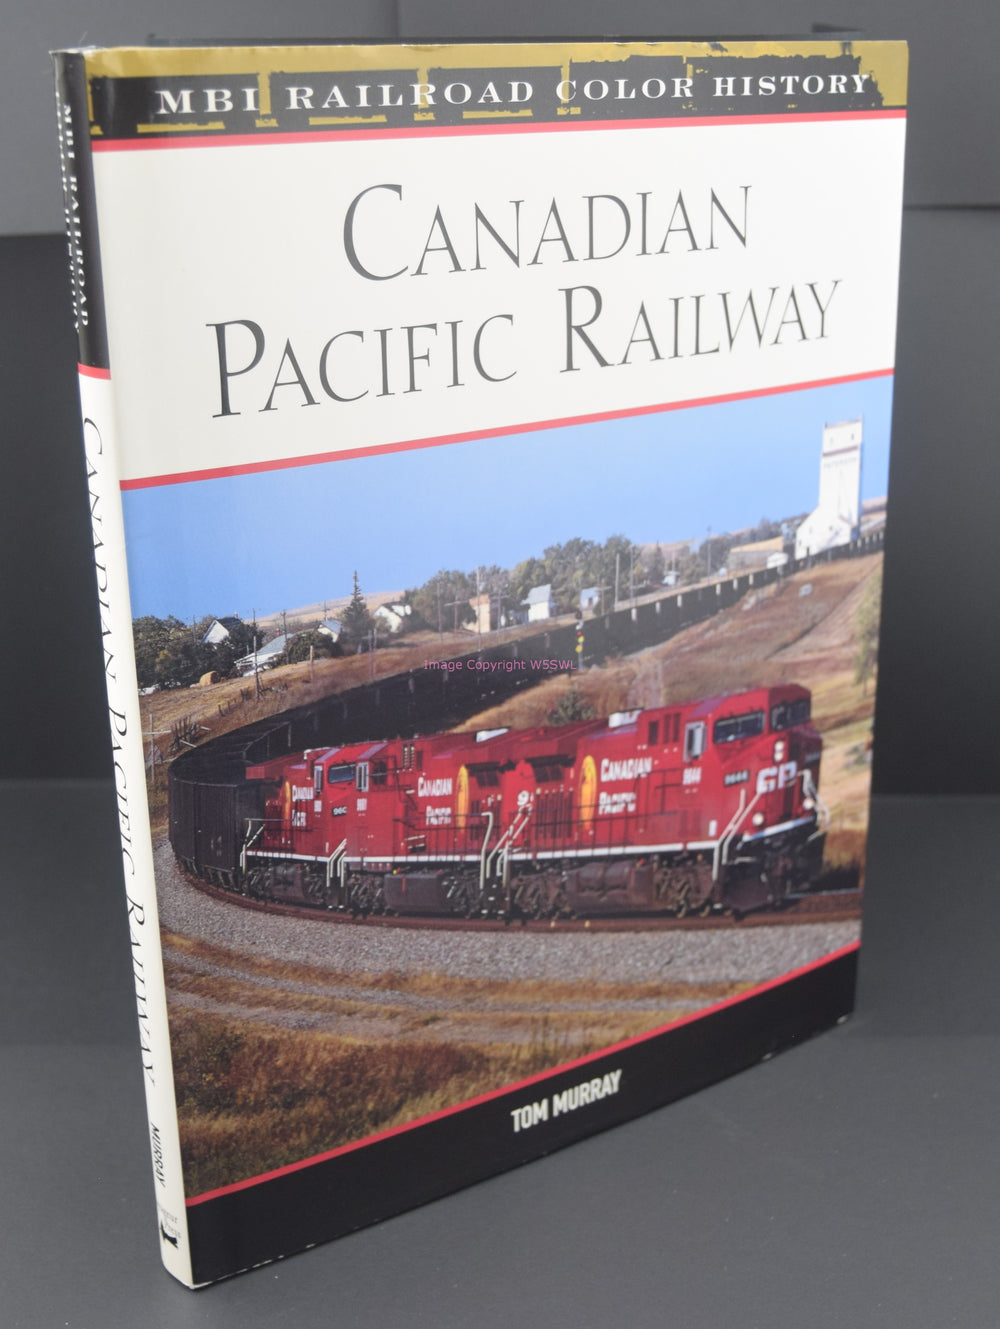 Canadian Pacific Railway by Tom Murray - Dave's Hobby Shop by W5SWL